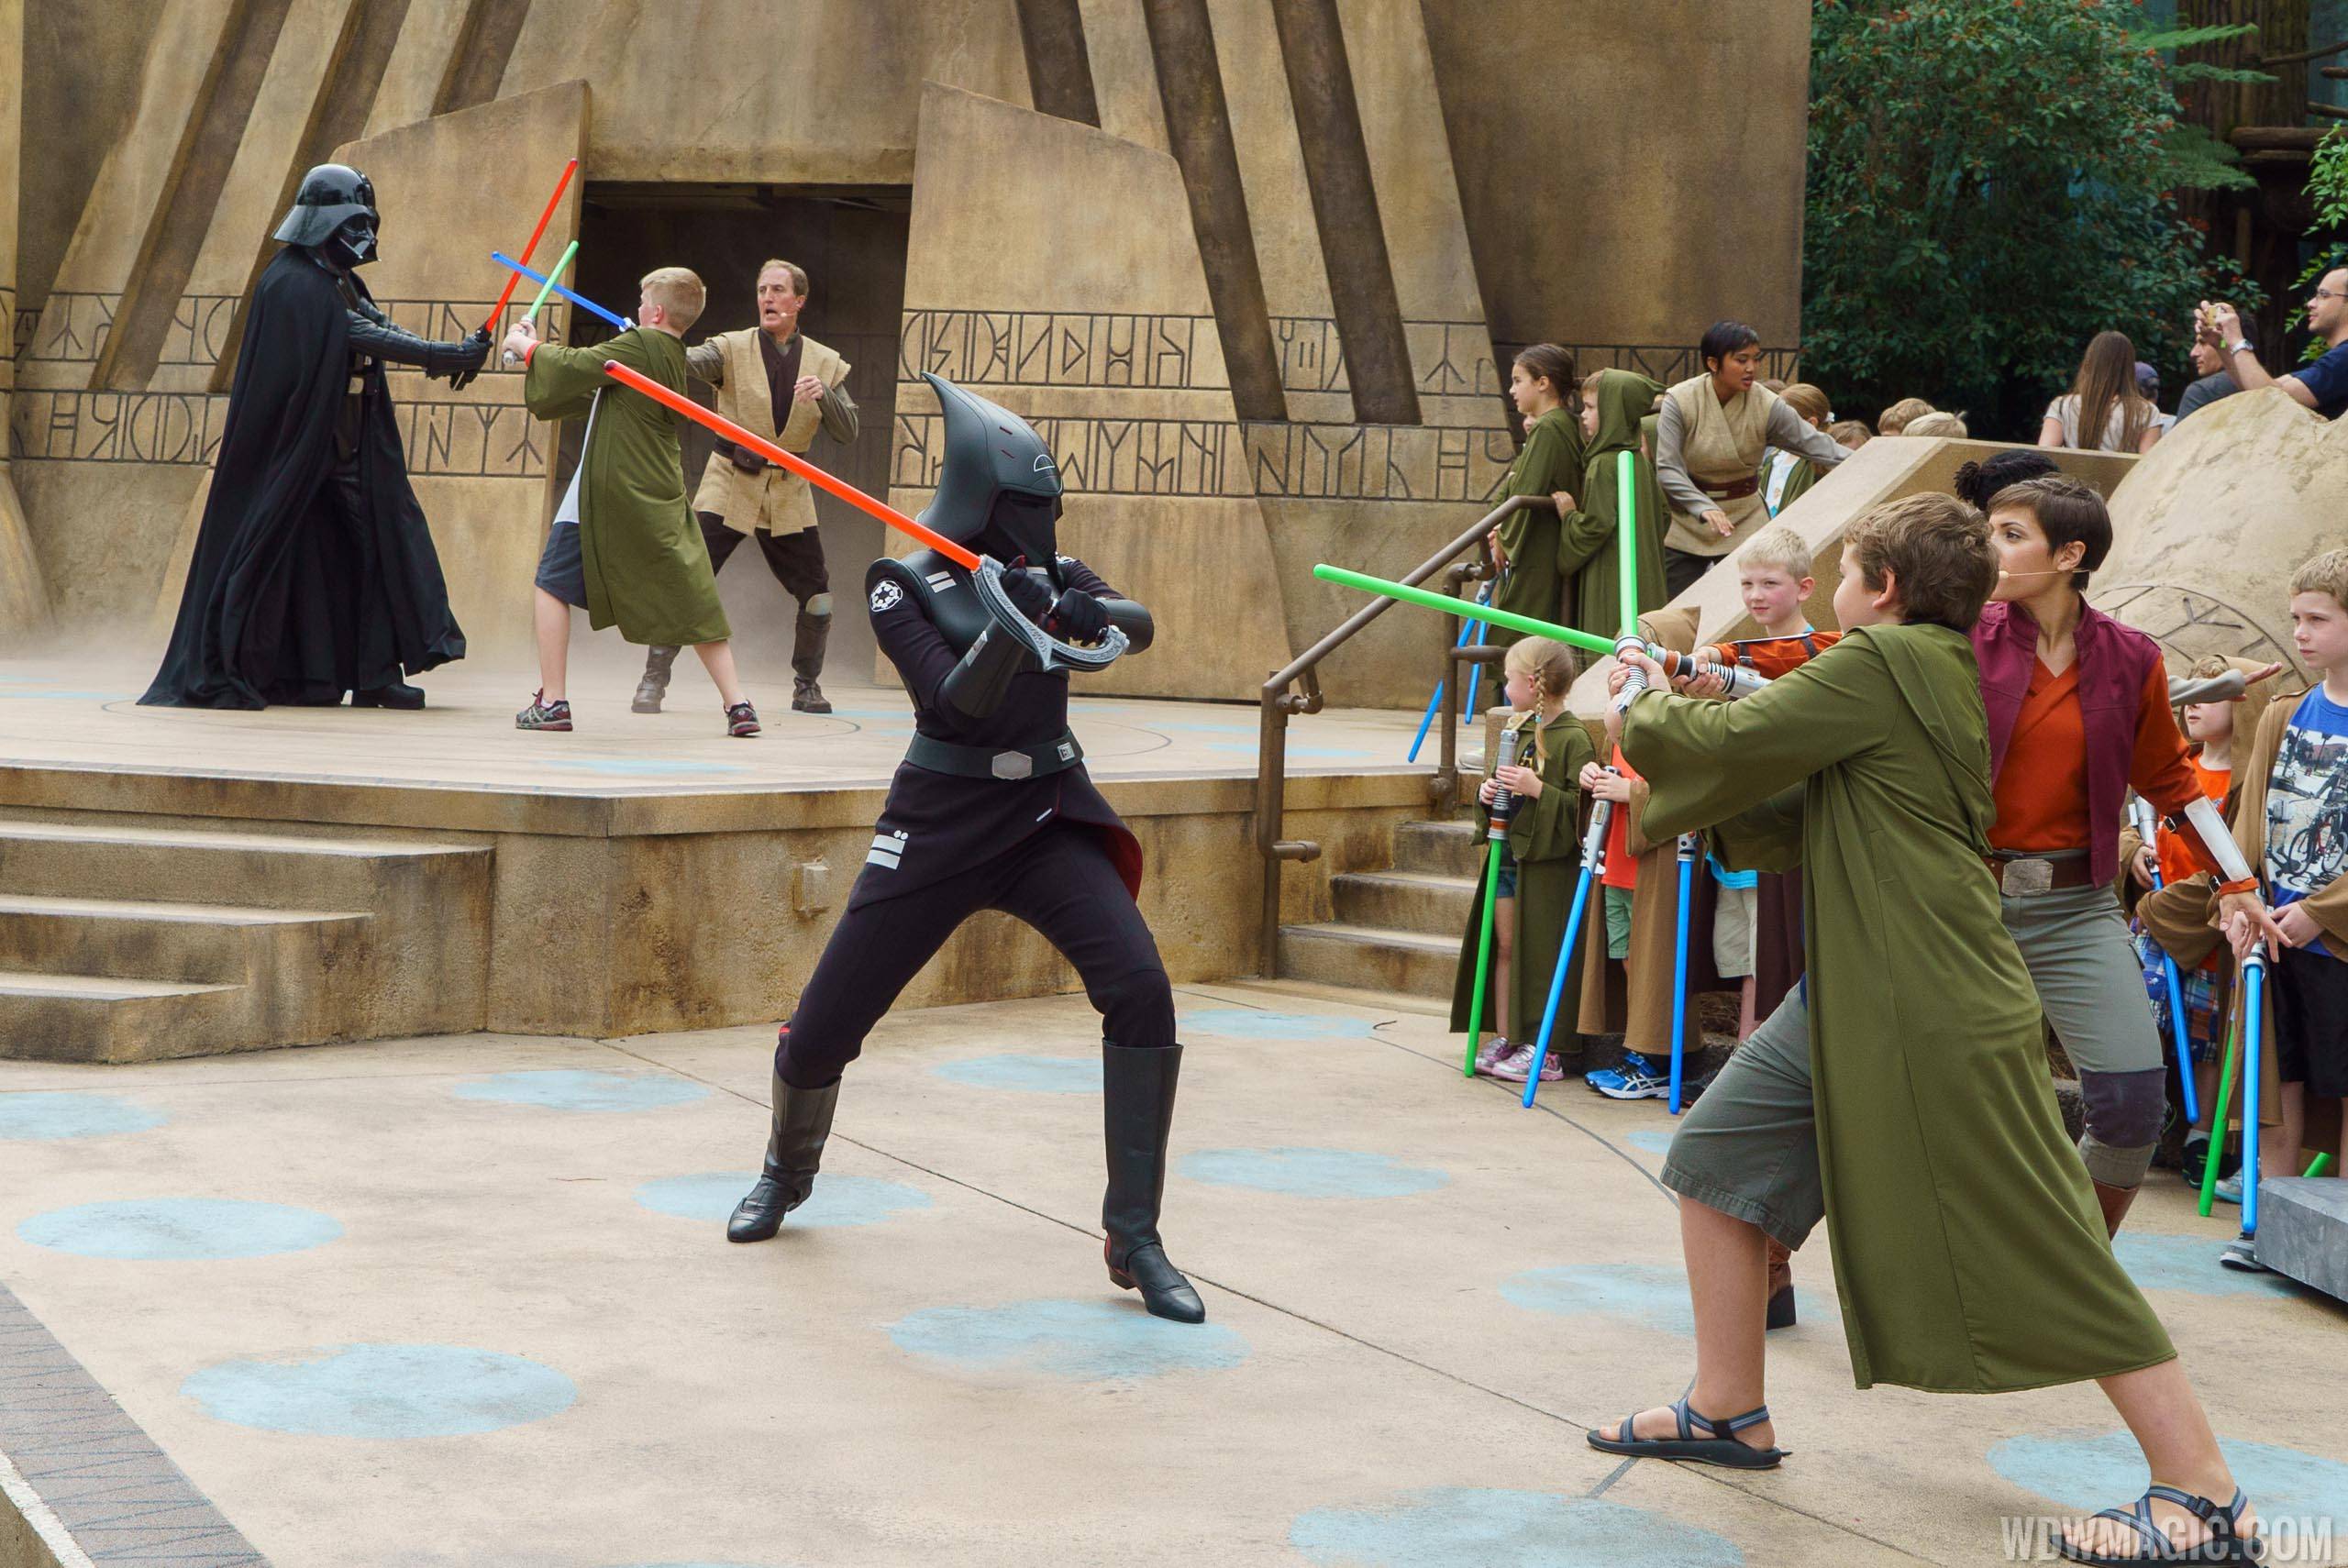 Jedi Training Academy to close to reopen later this year as 'Jedi Training - Trials of the Temple'